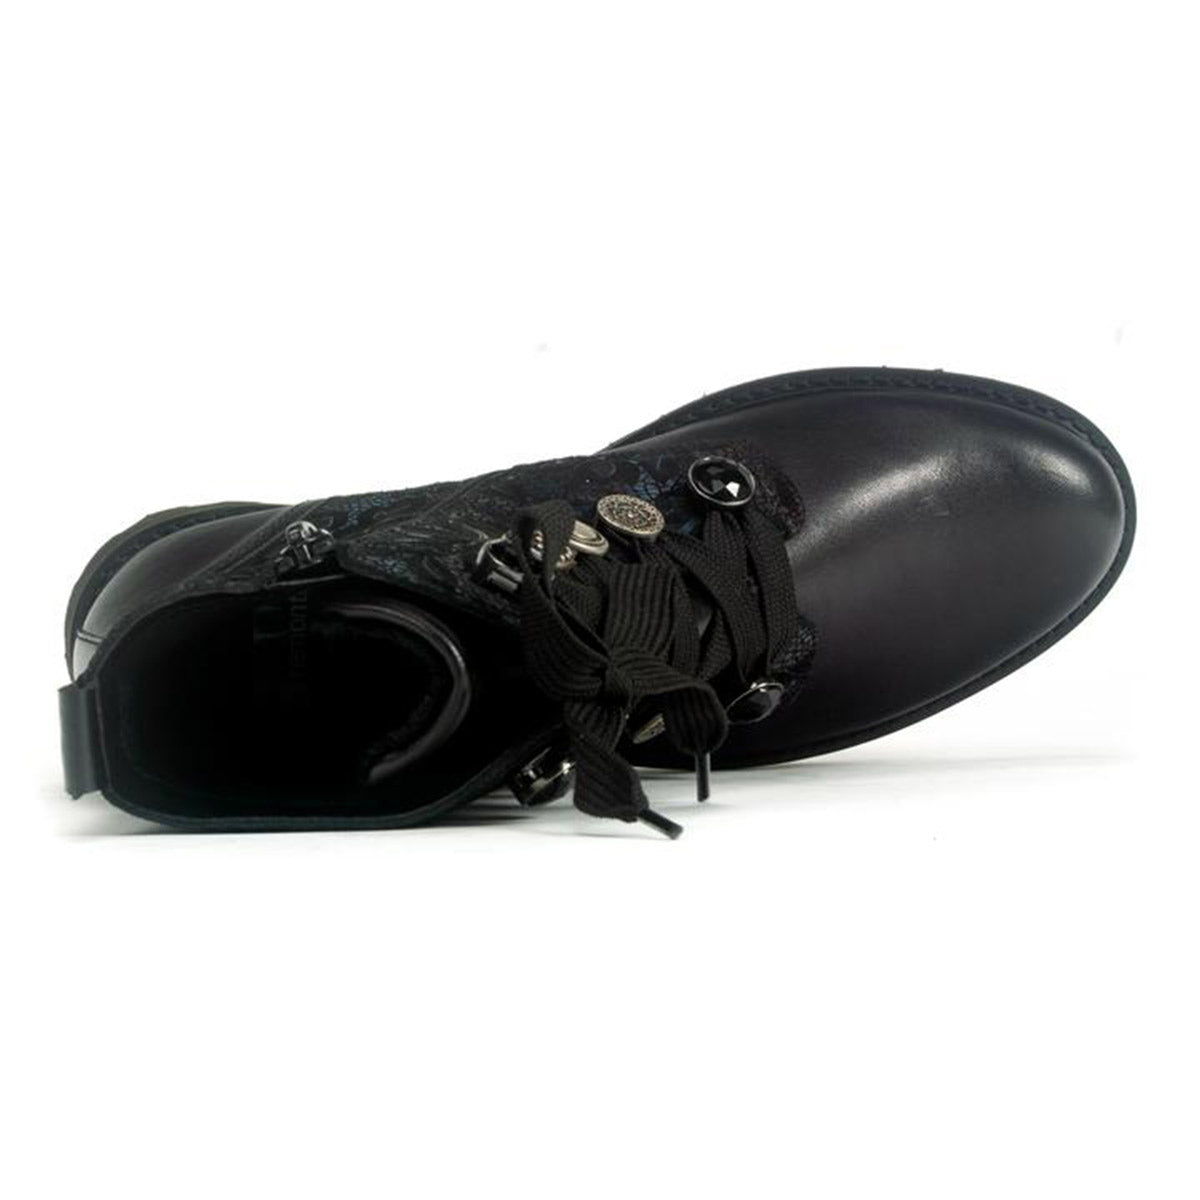 A single Remonte Floral Ankle Boot Black - Women&#39;s with lace and zipper closure against a white background.